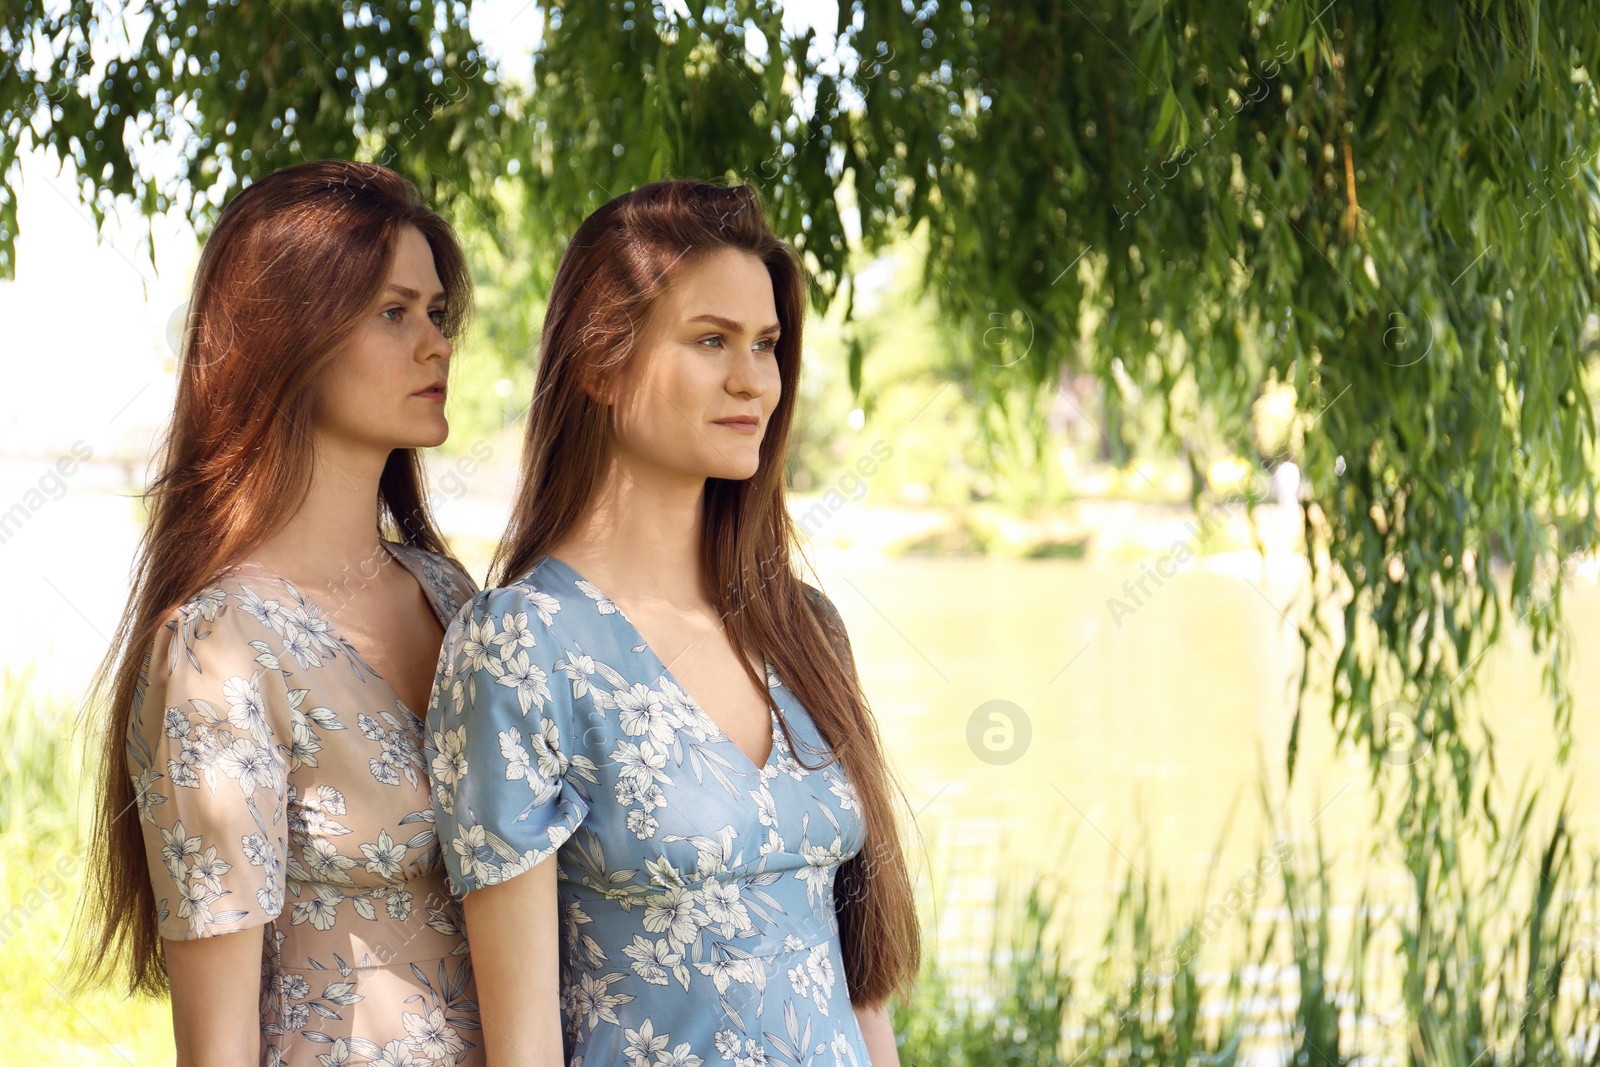 Photo of Portrait of two beautiful twin sisters in park, space for text